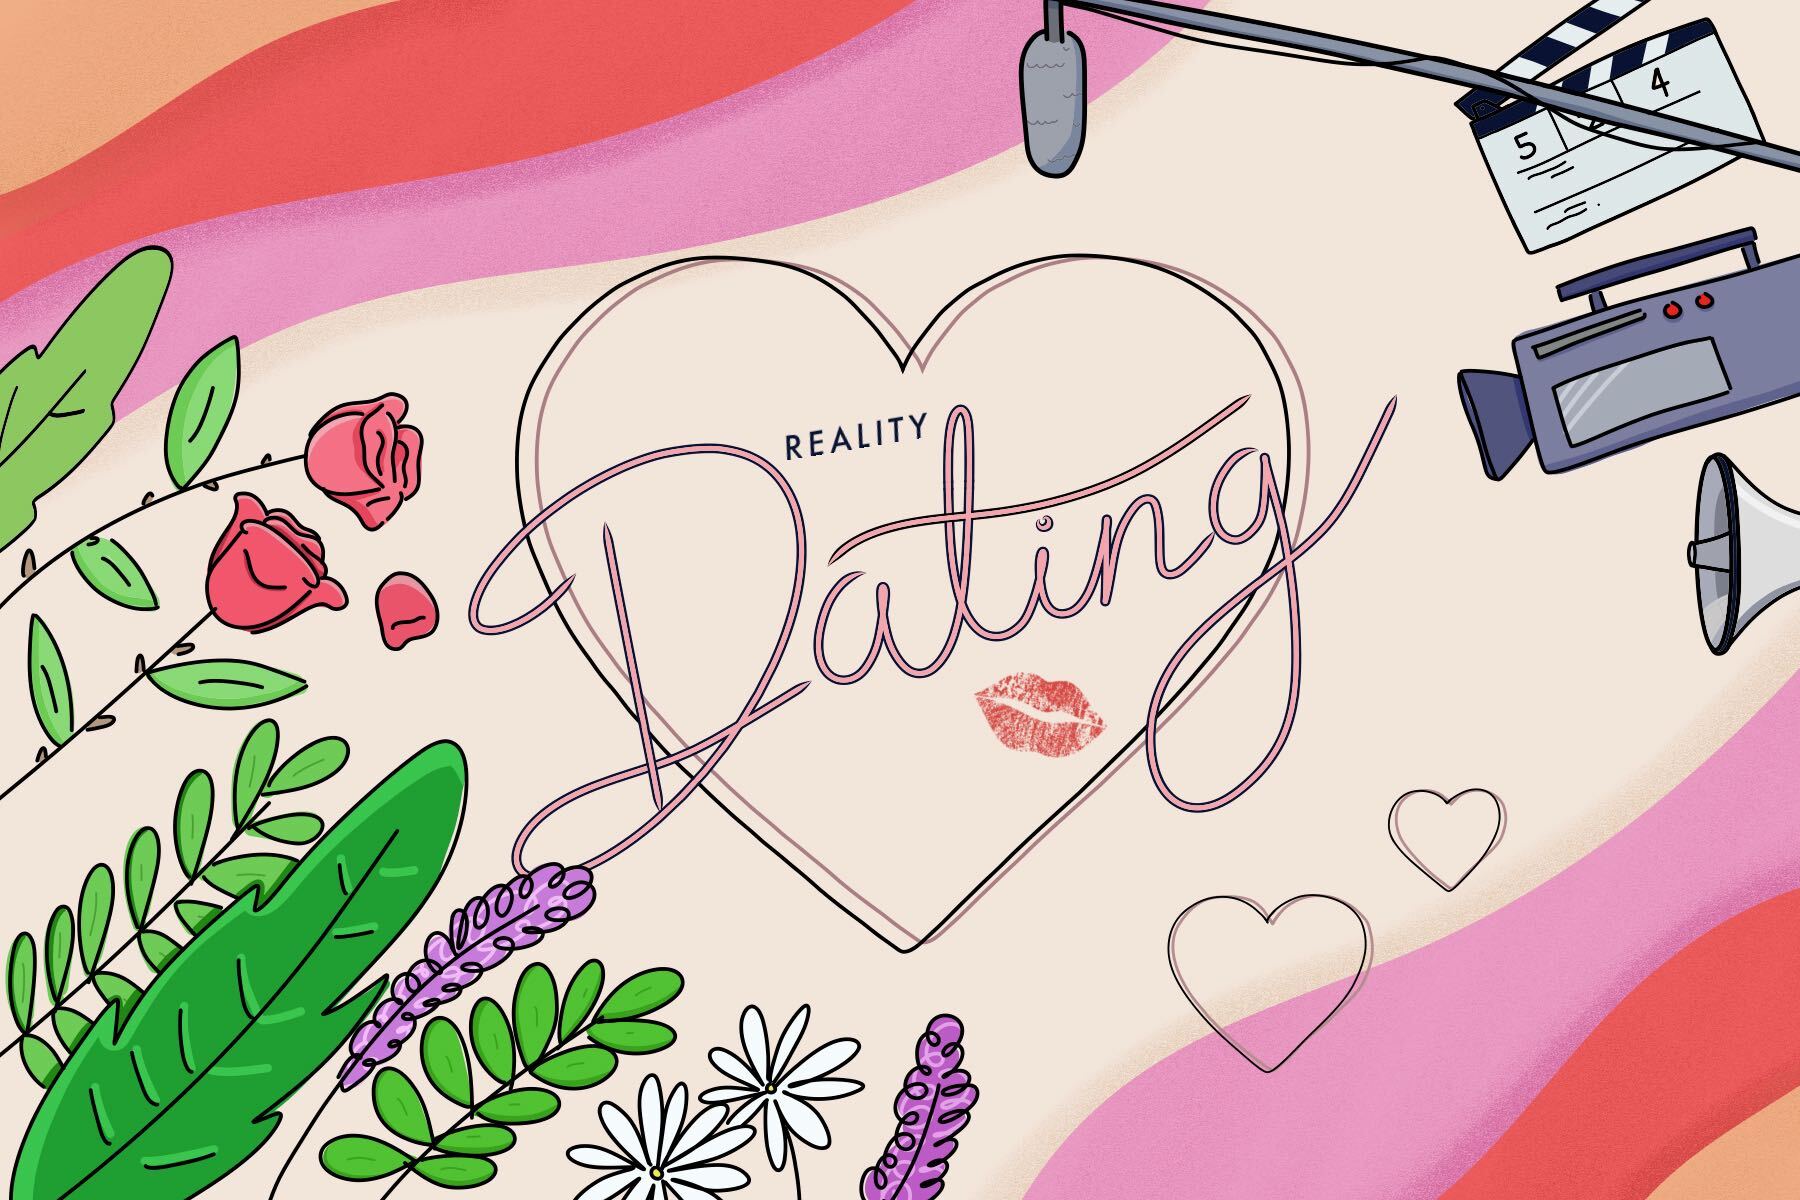 In an article about the six best reality dating series on Netflix, bouquets of flowers and film equipment surround a heart that reads 'Reality Dating.'